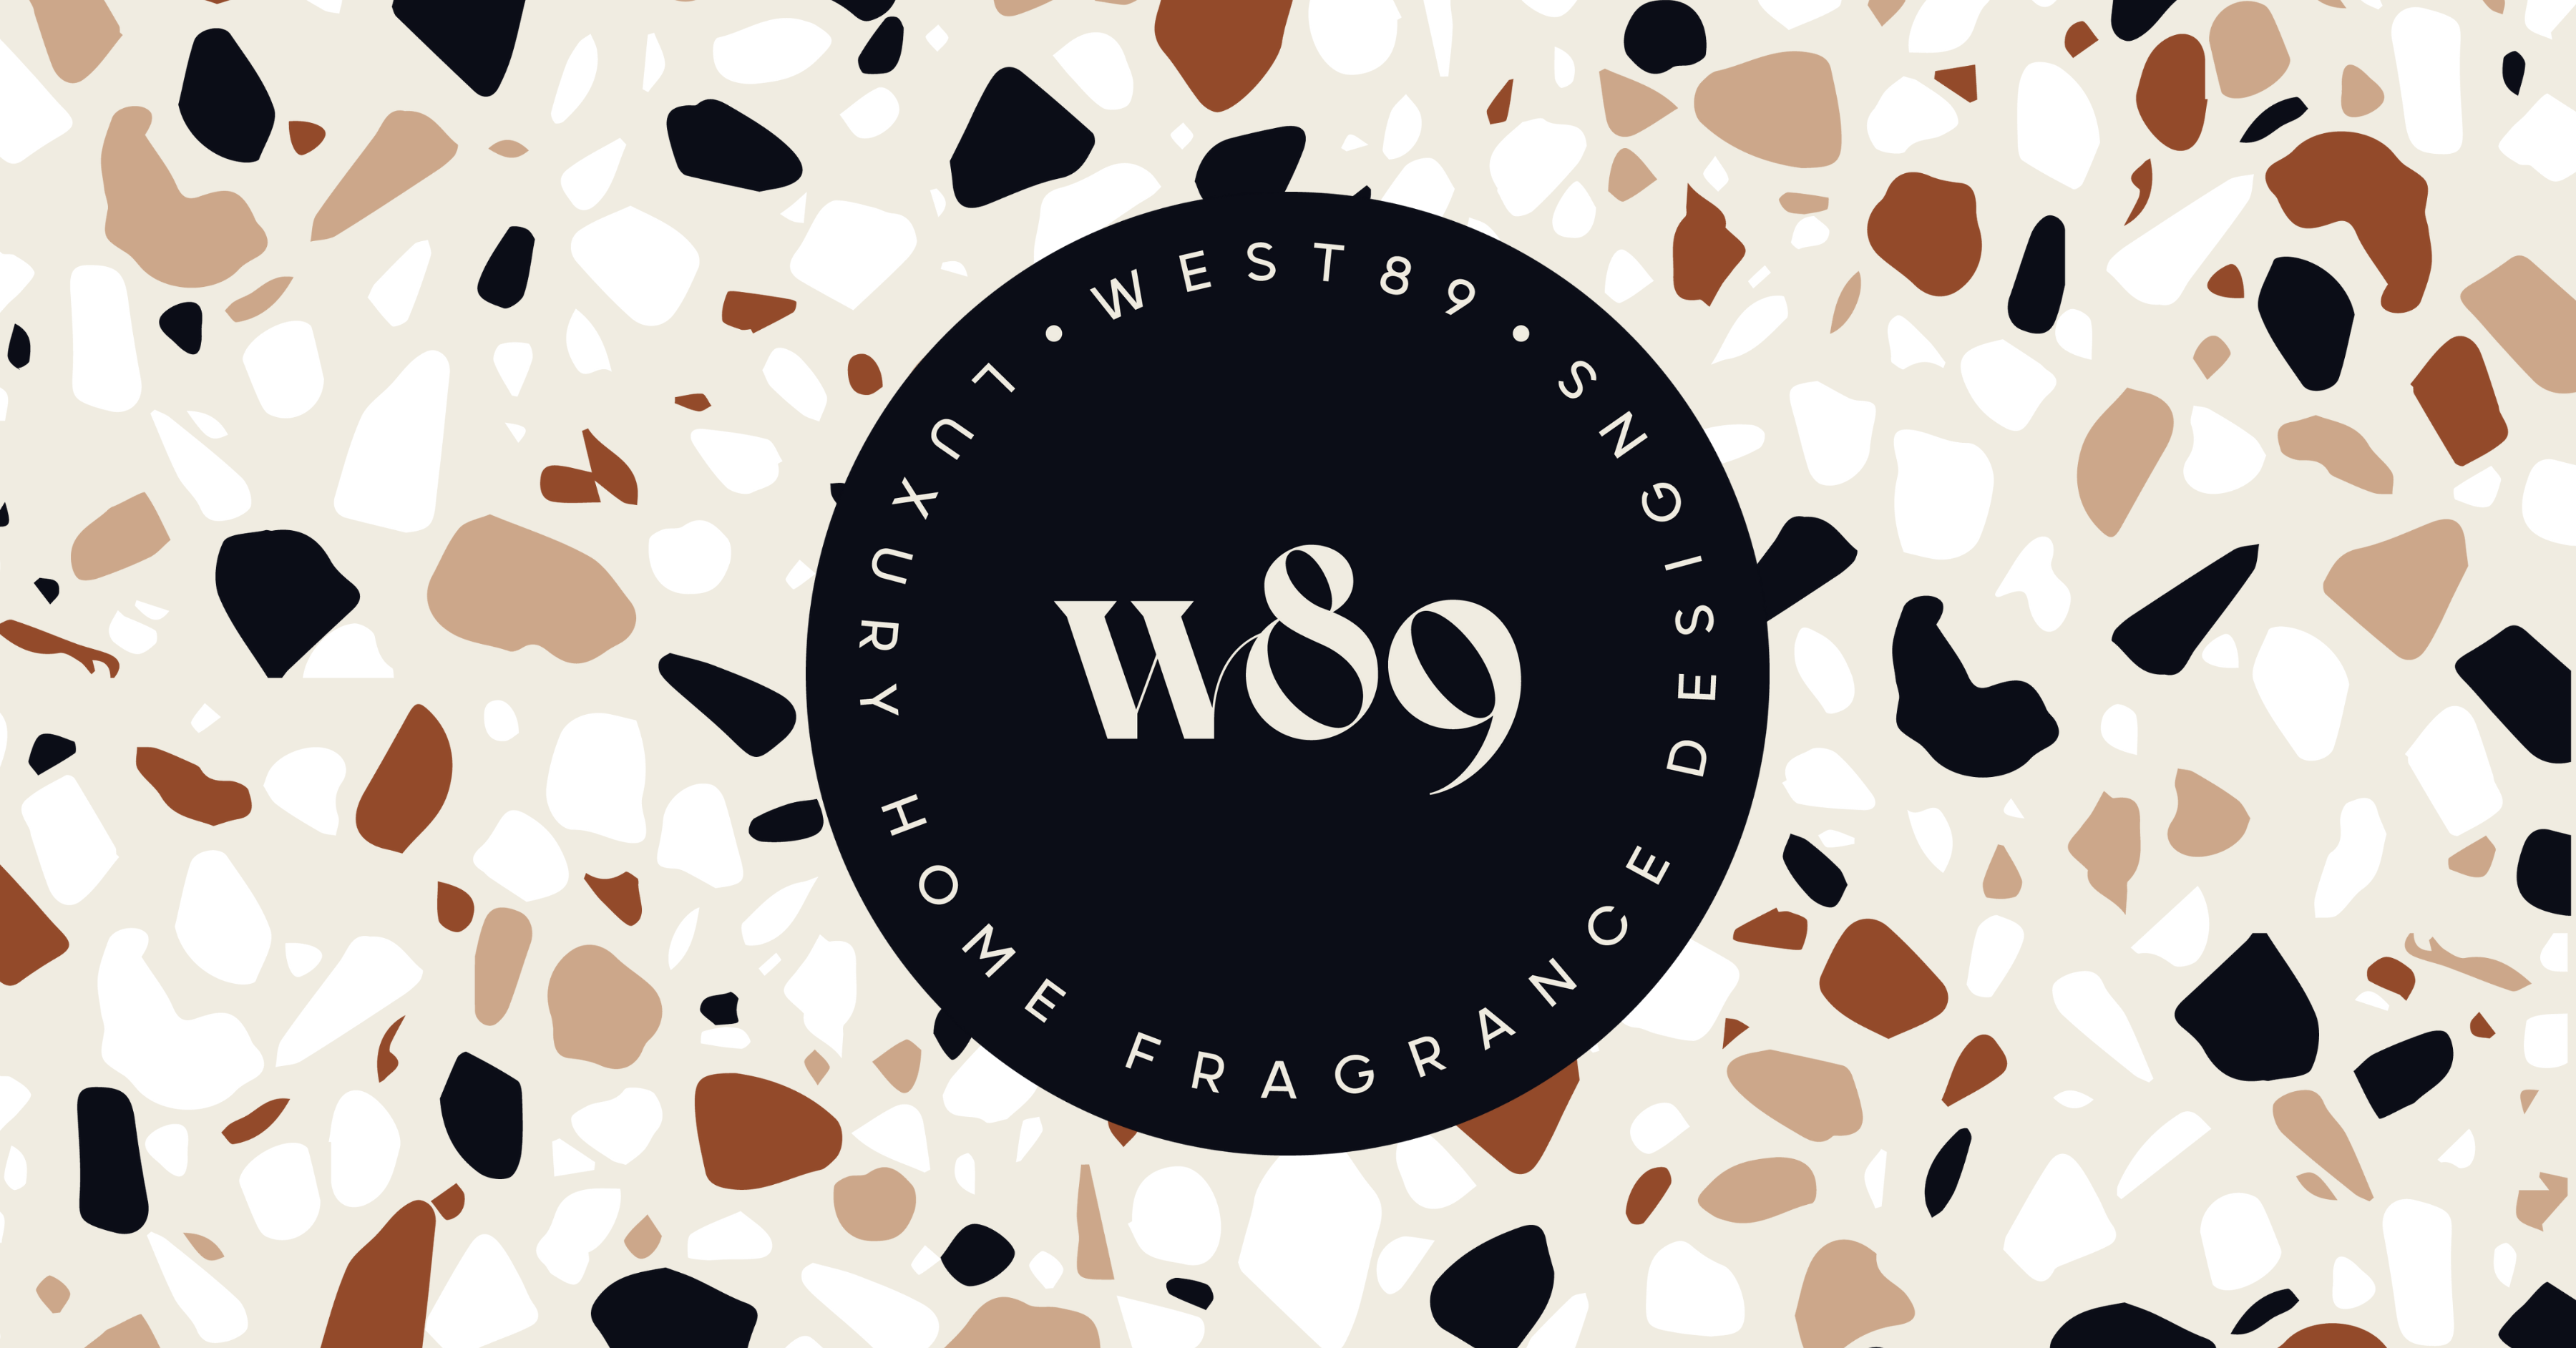 west89 gift card.